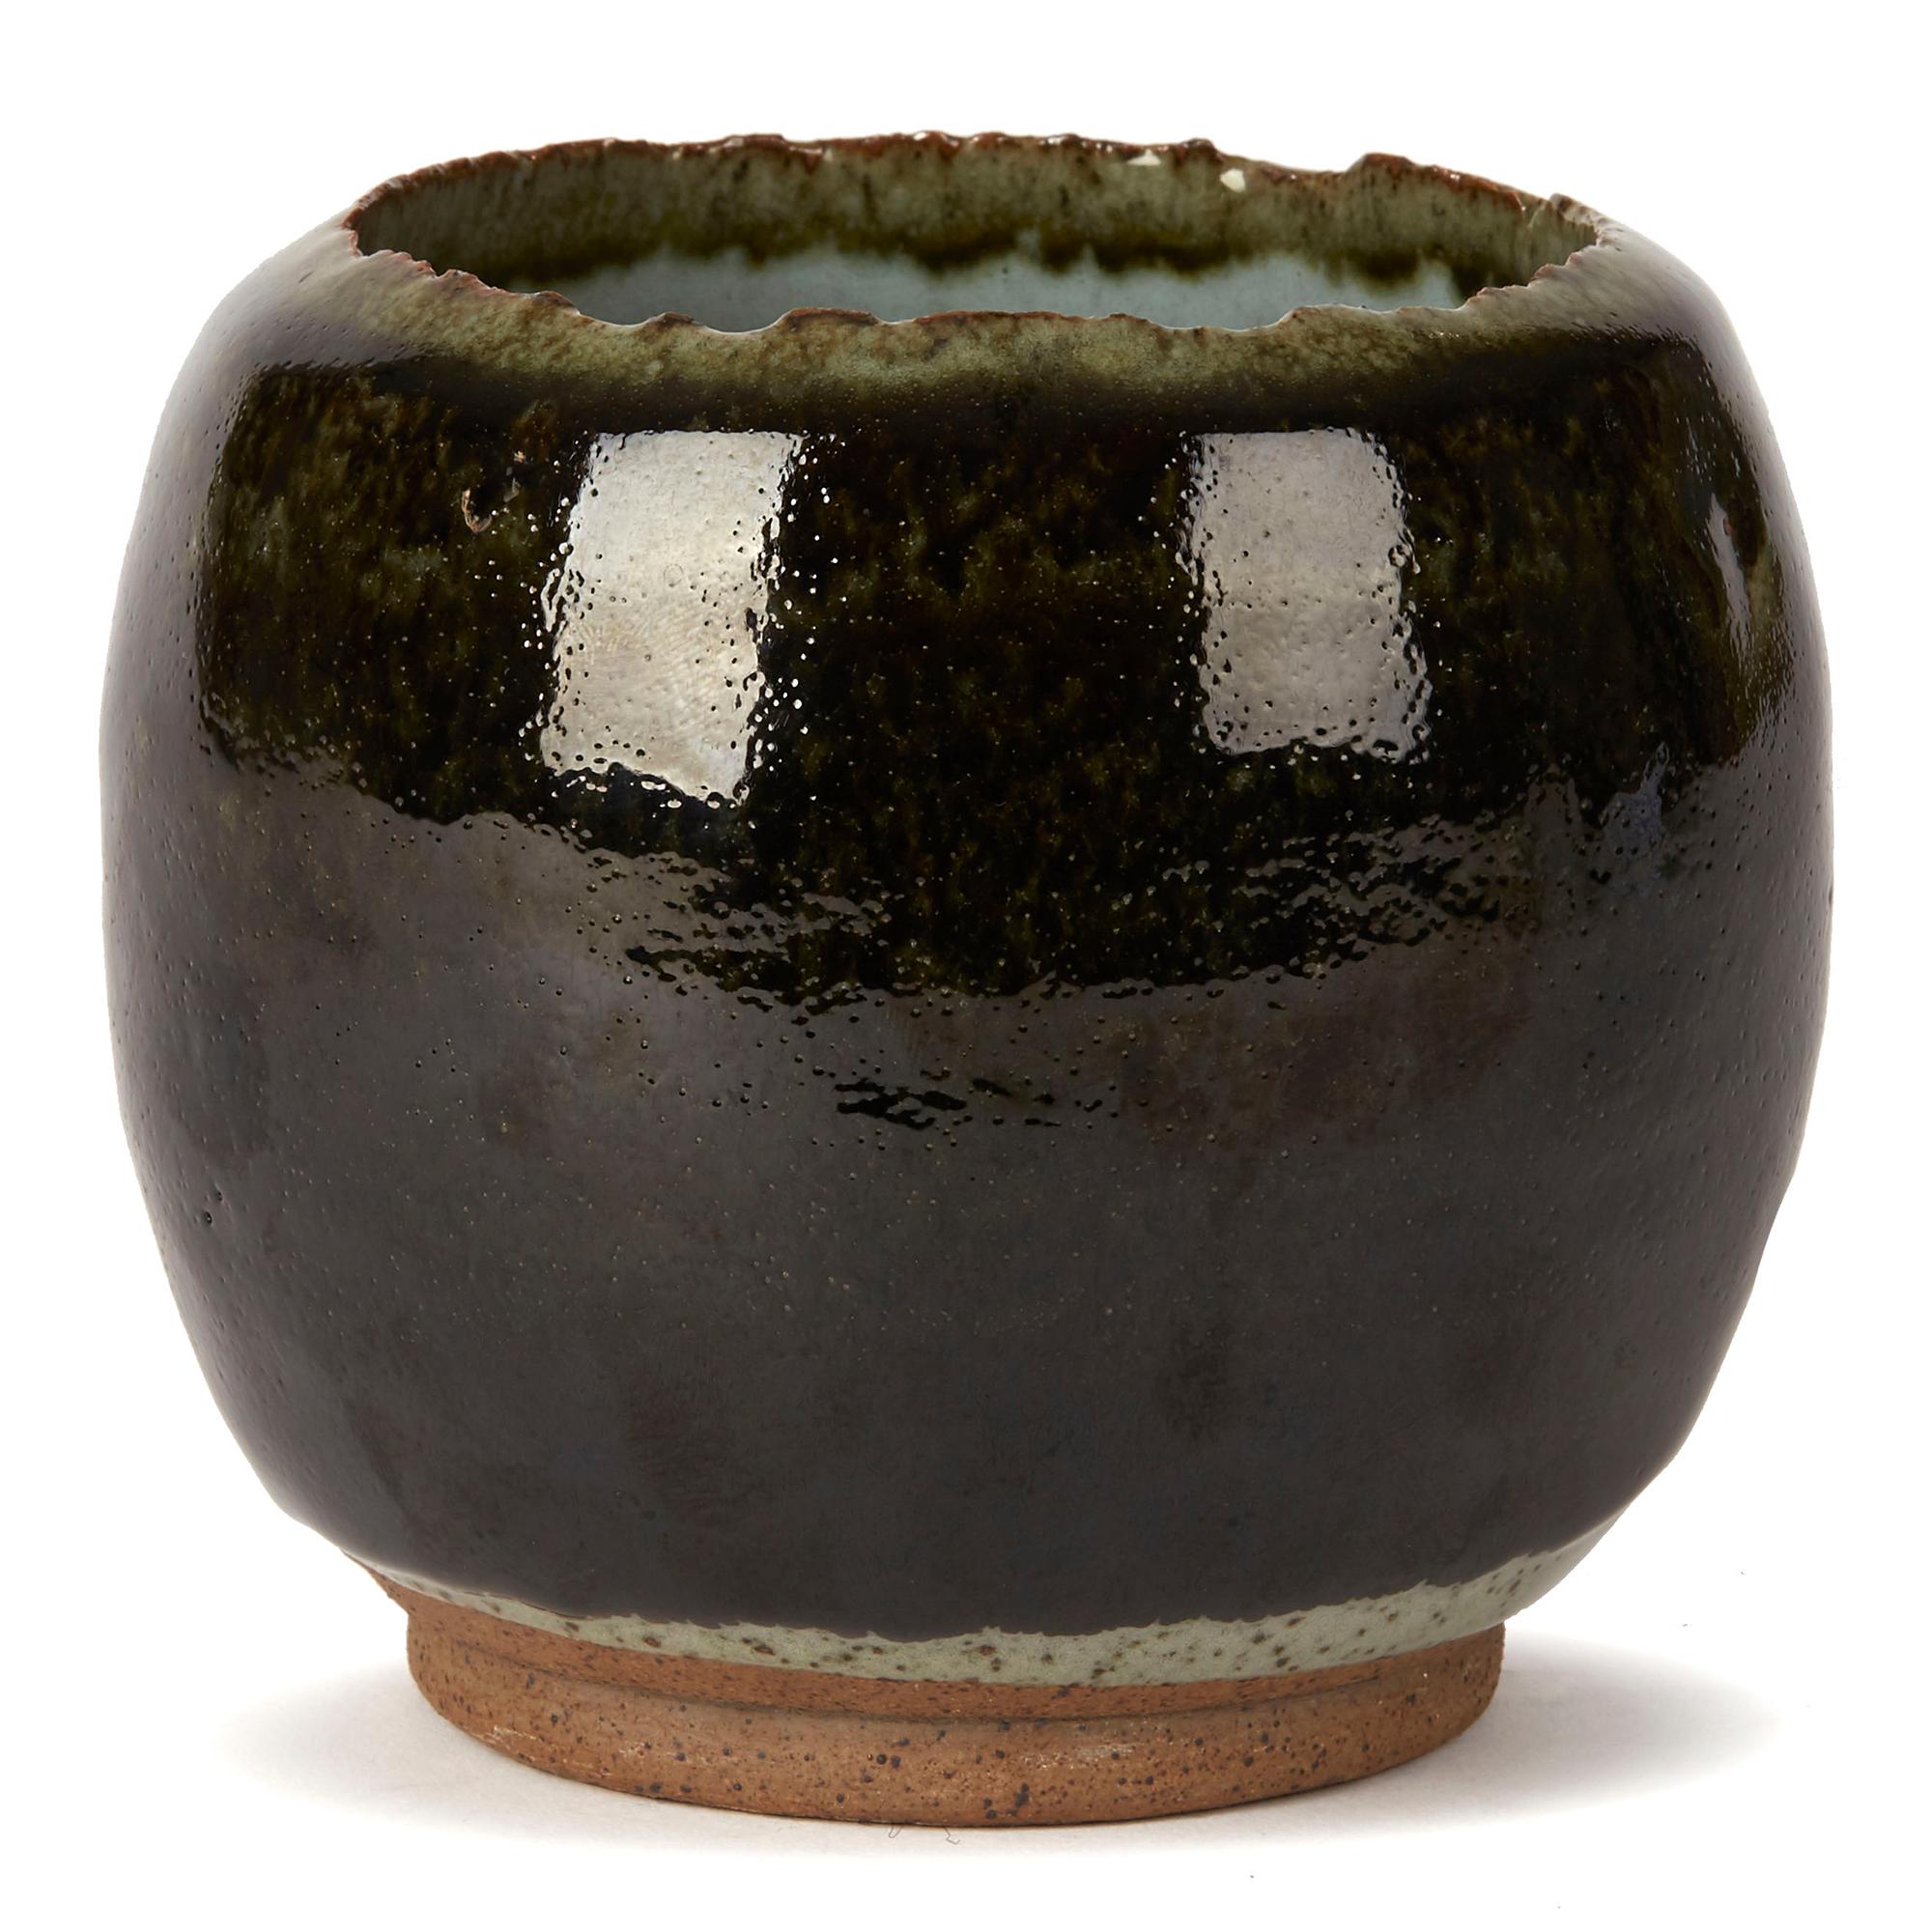 A hand thrown Studio Pottery stoneware vase decorated in green glazes by Ying Yeung Li (B.1951). The heavily potted vase stands on a narrow rounded unglazed foot and has a roughly cut top rim with the body applied on grey stone glazes with the outer